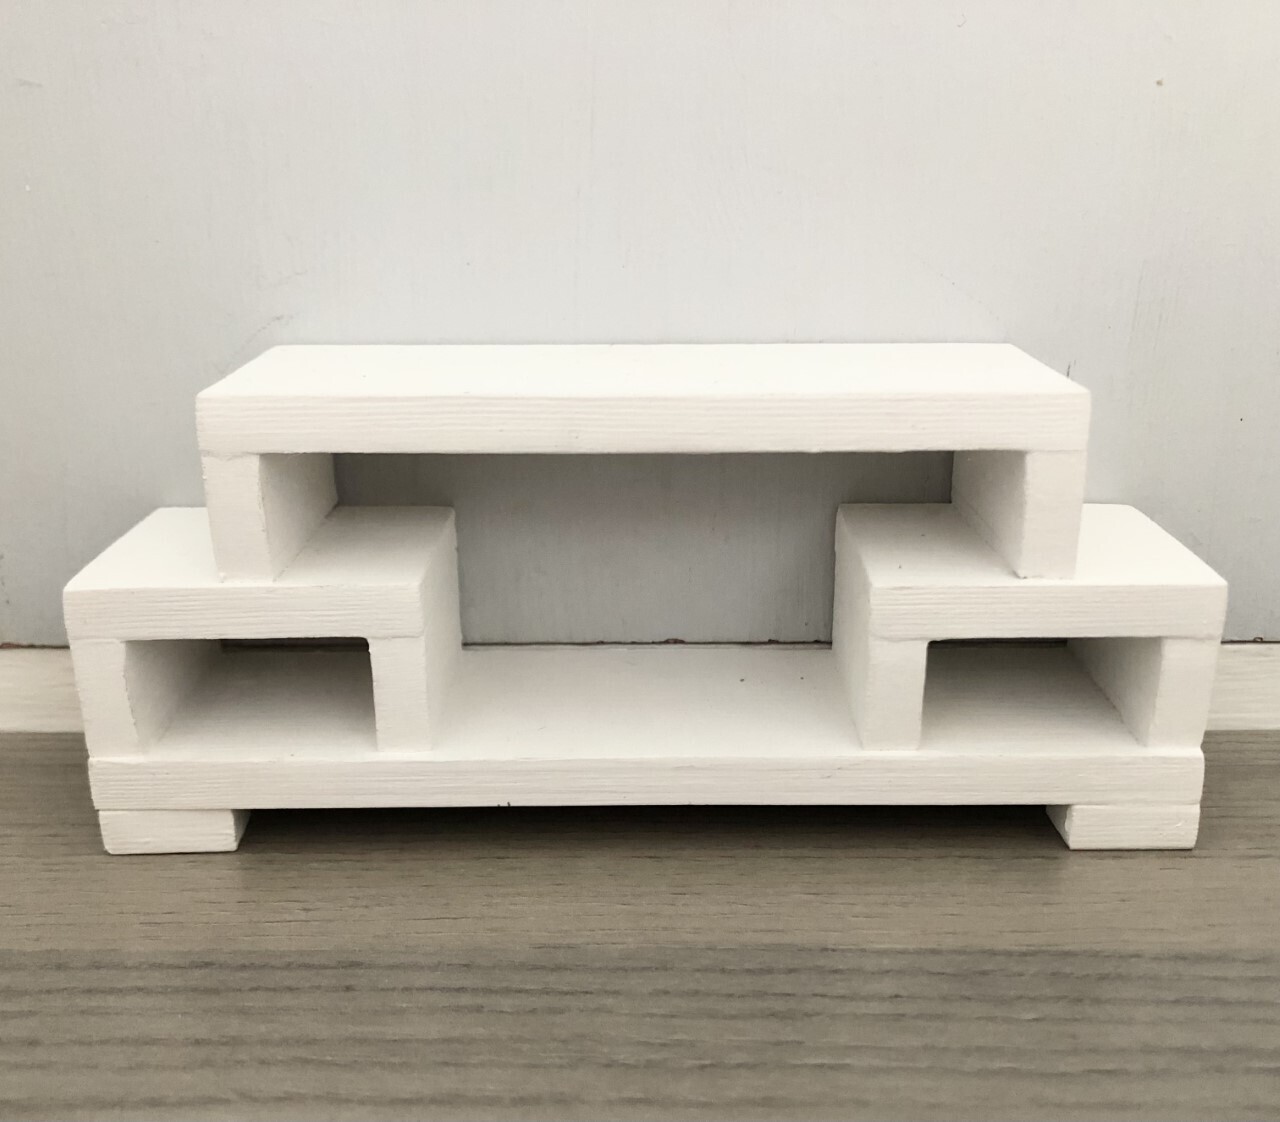 1:12 scale TV Unit for dolls house